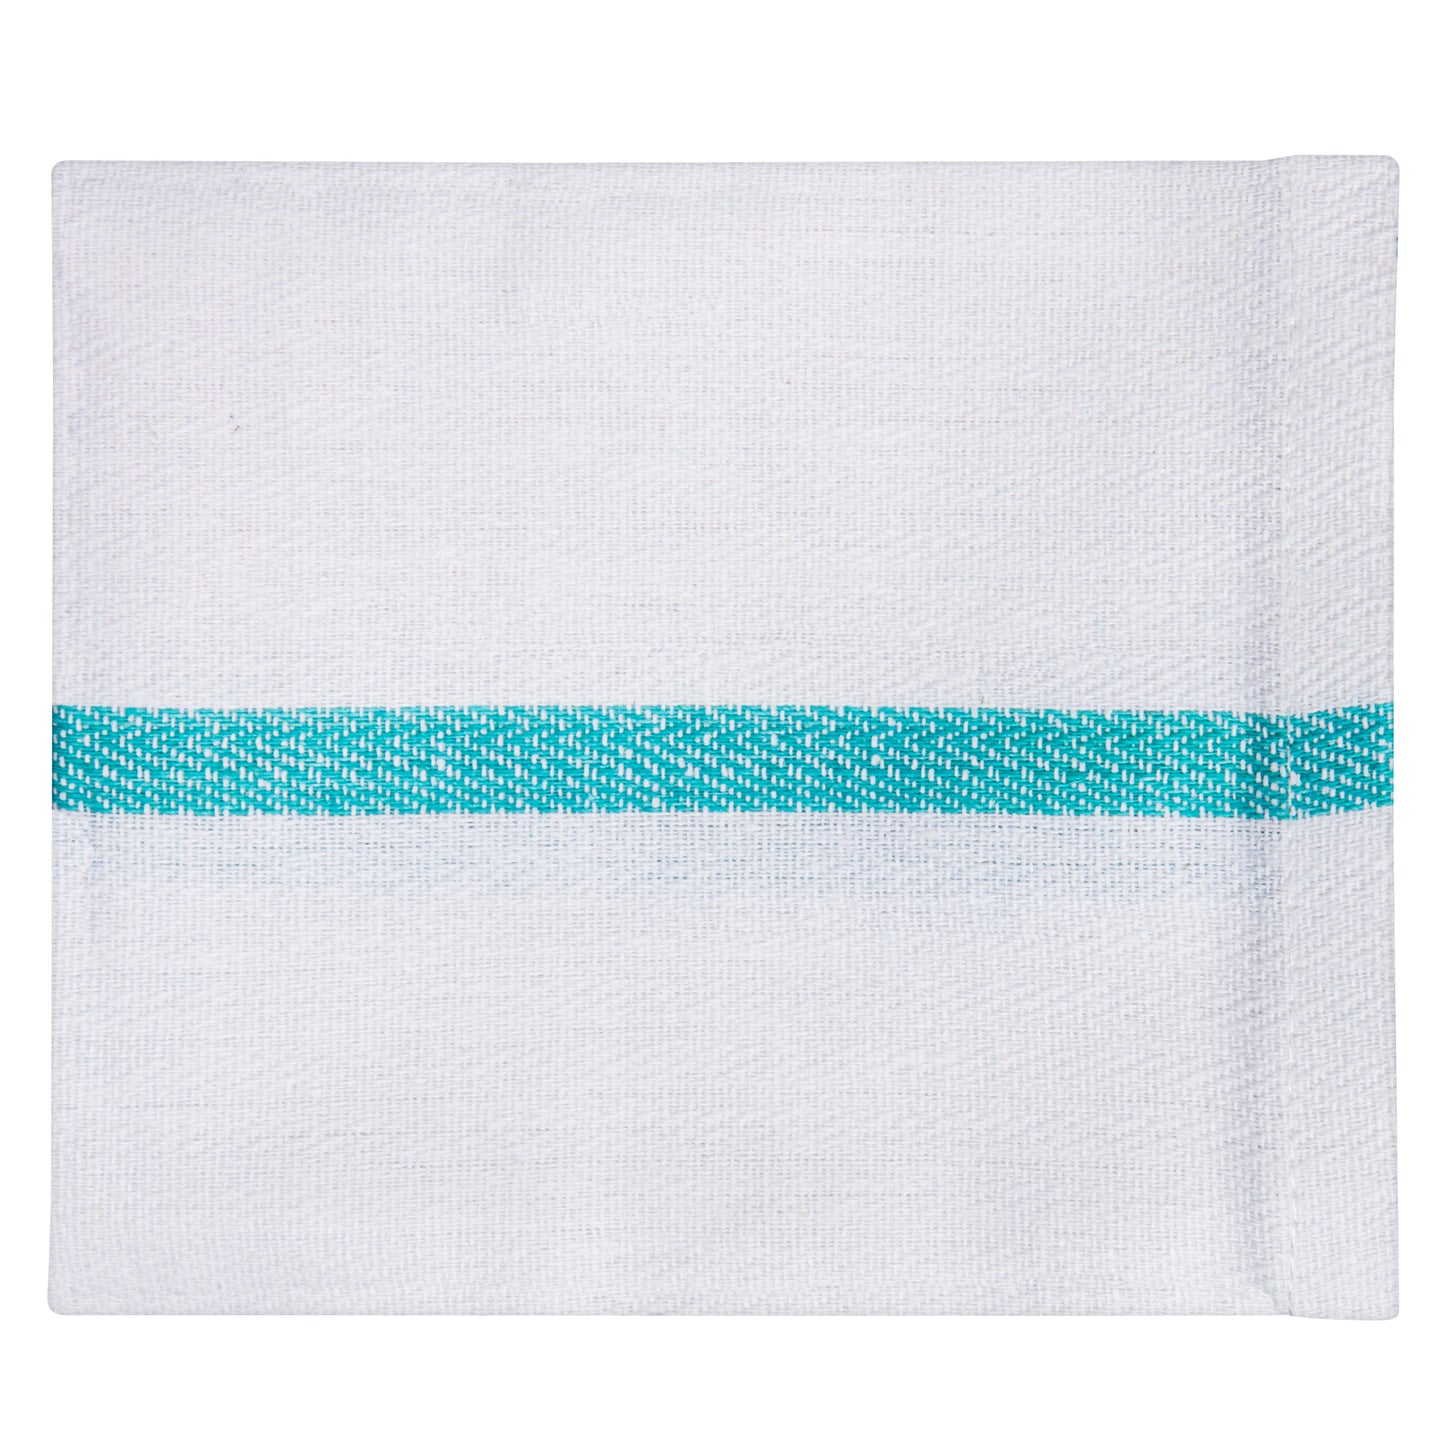 Terry Towel, 16x27 inch, No Cam, 10 Single Pile, Hemmed, White with Green Stripe